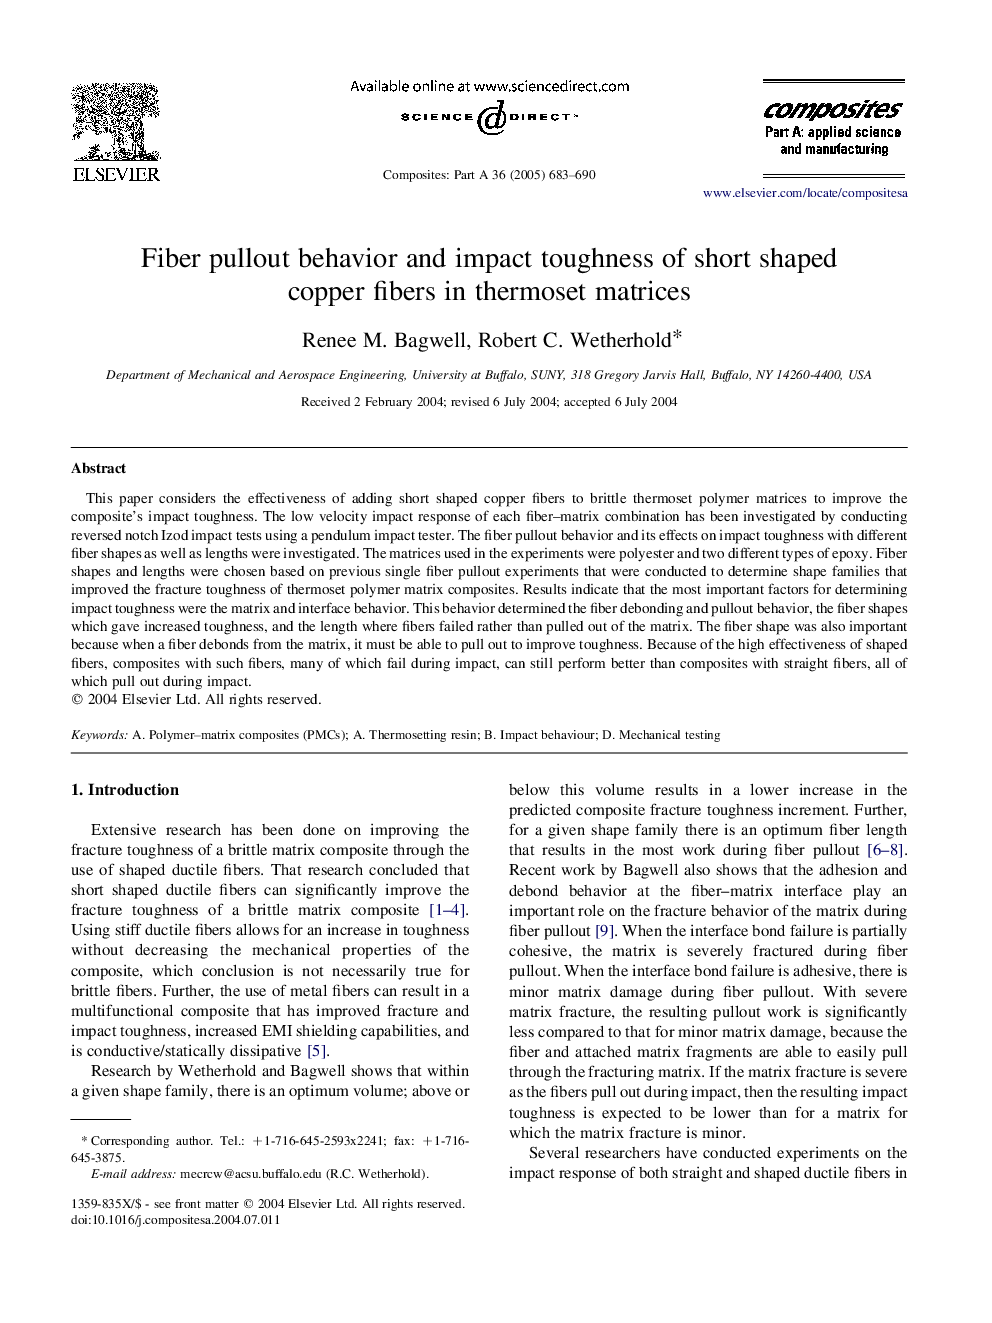 Fiber pullout behavior and impact toughness of short shaped copper fibers in thermoset matrices